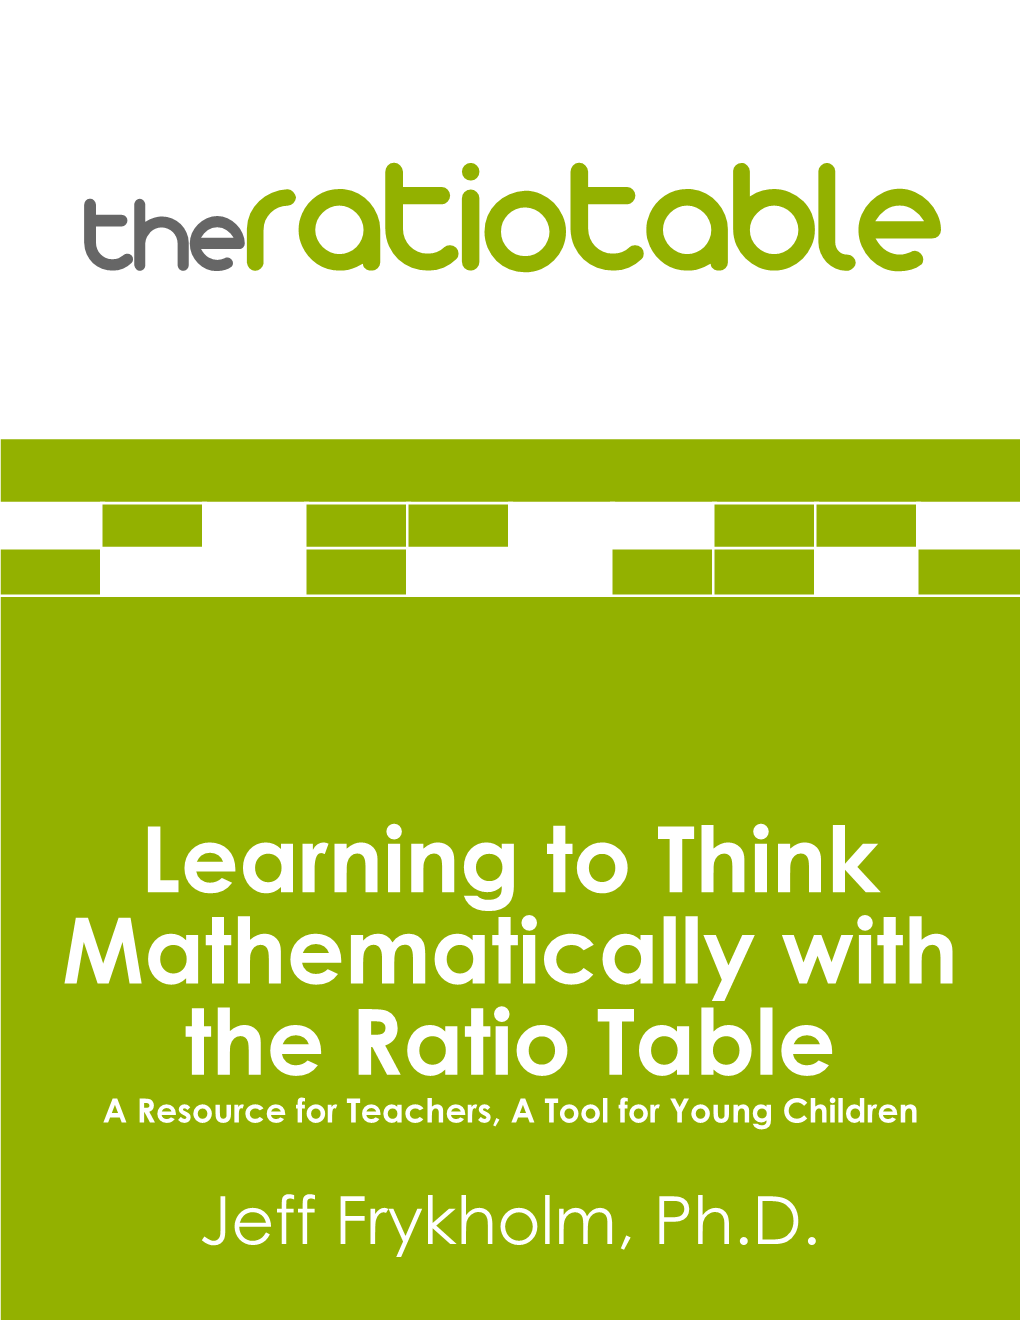 Learning to Think Mathematically with the Ratio Table a Resource for Teachers, a Tool for Young Children Jeff Frykholm, Ph.D